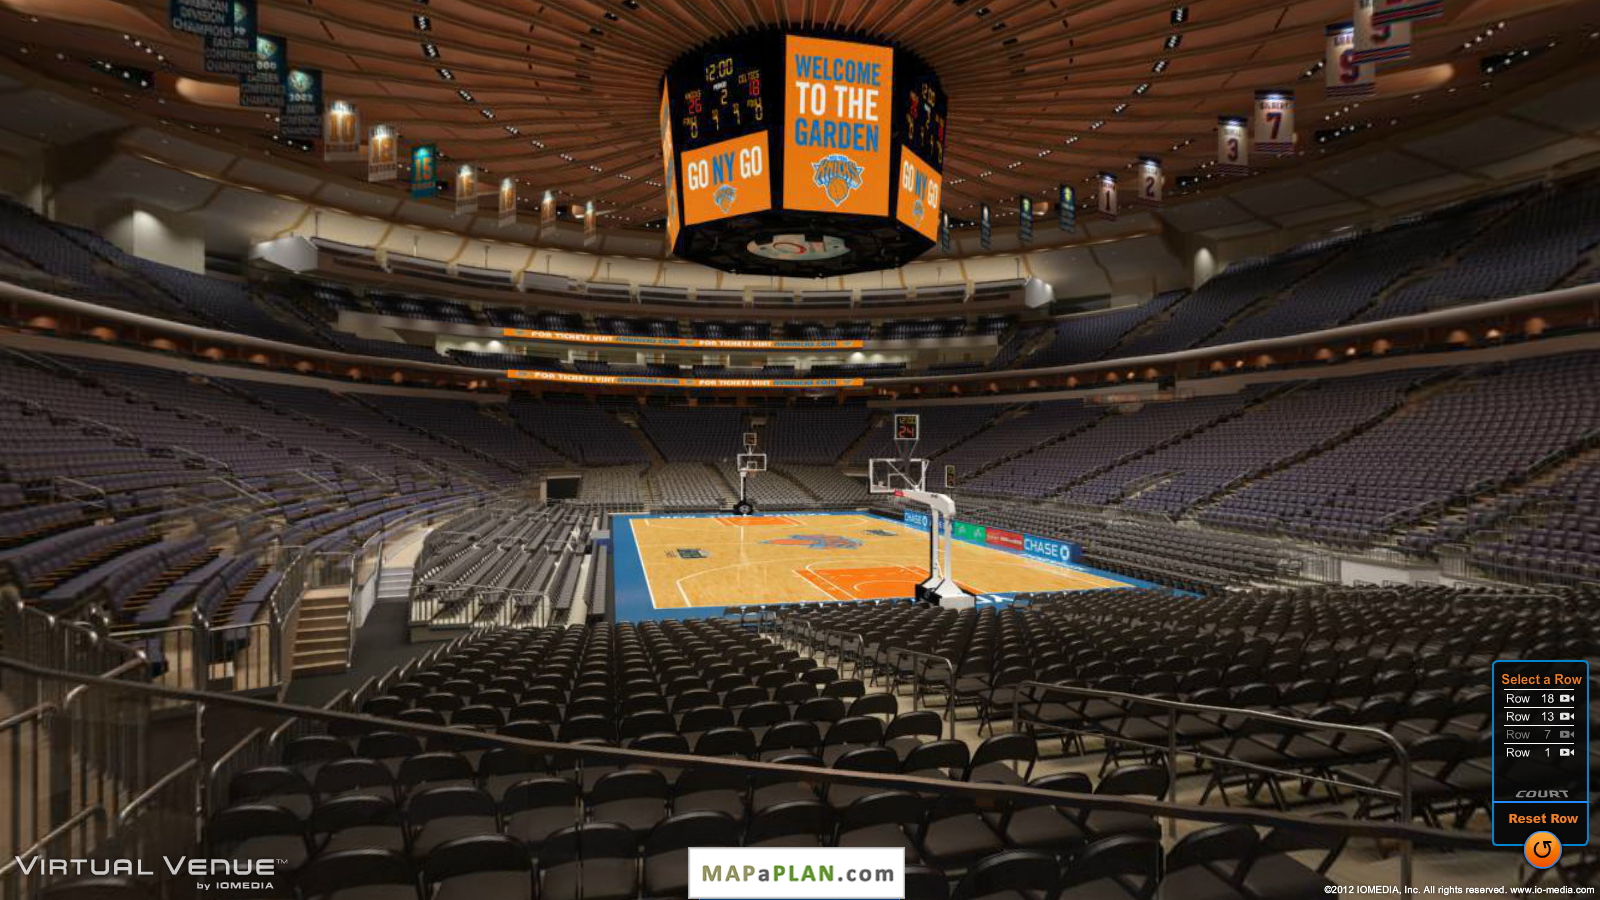 46+ Msg seating chart section 101